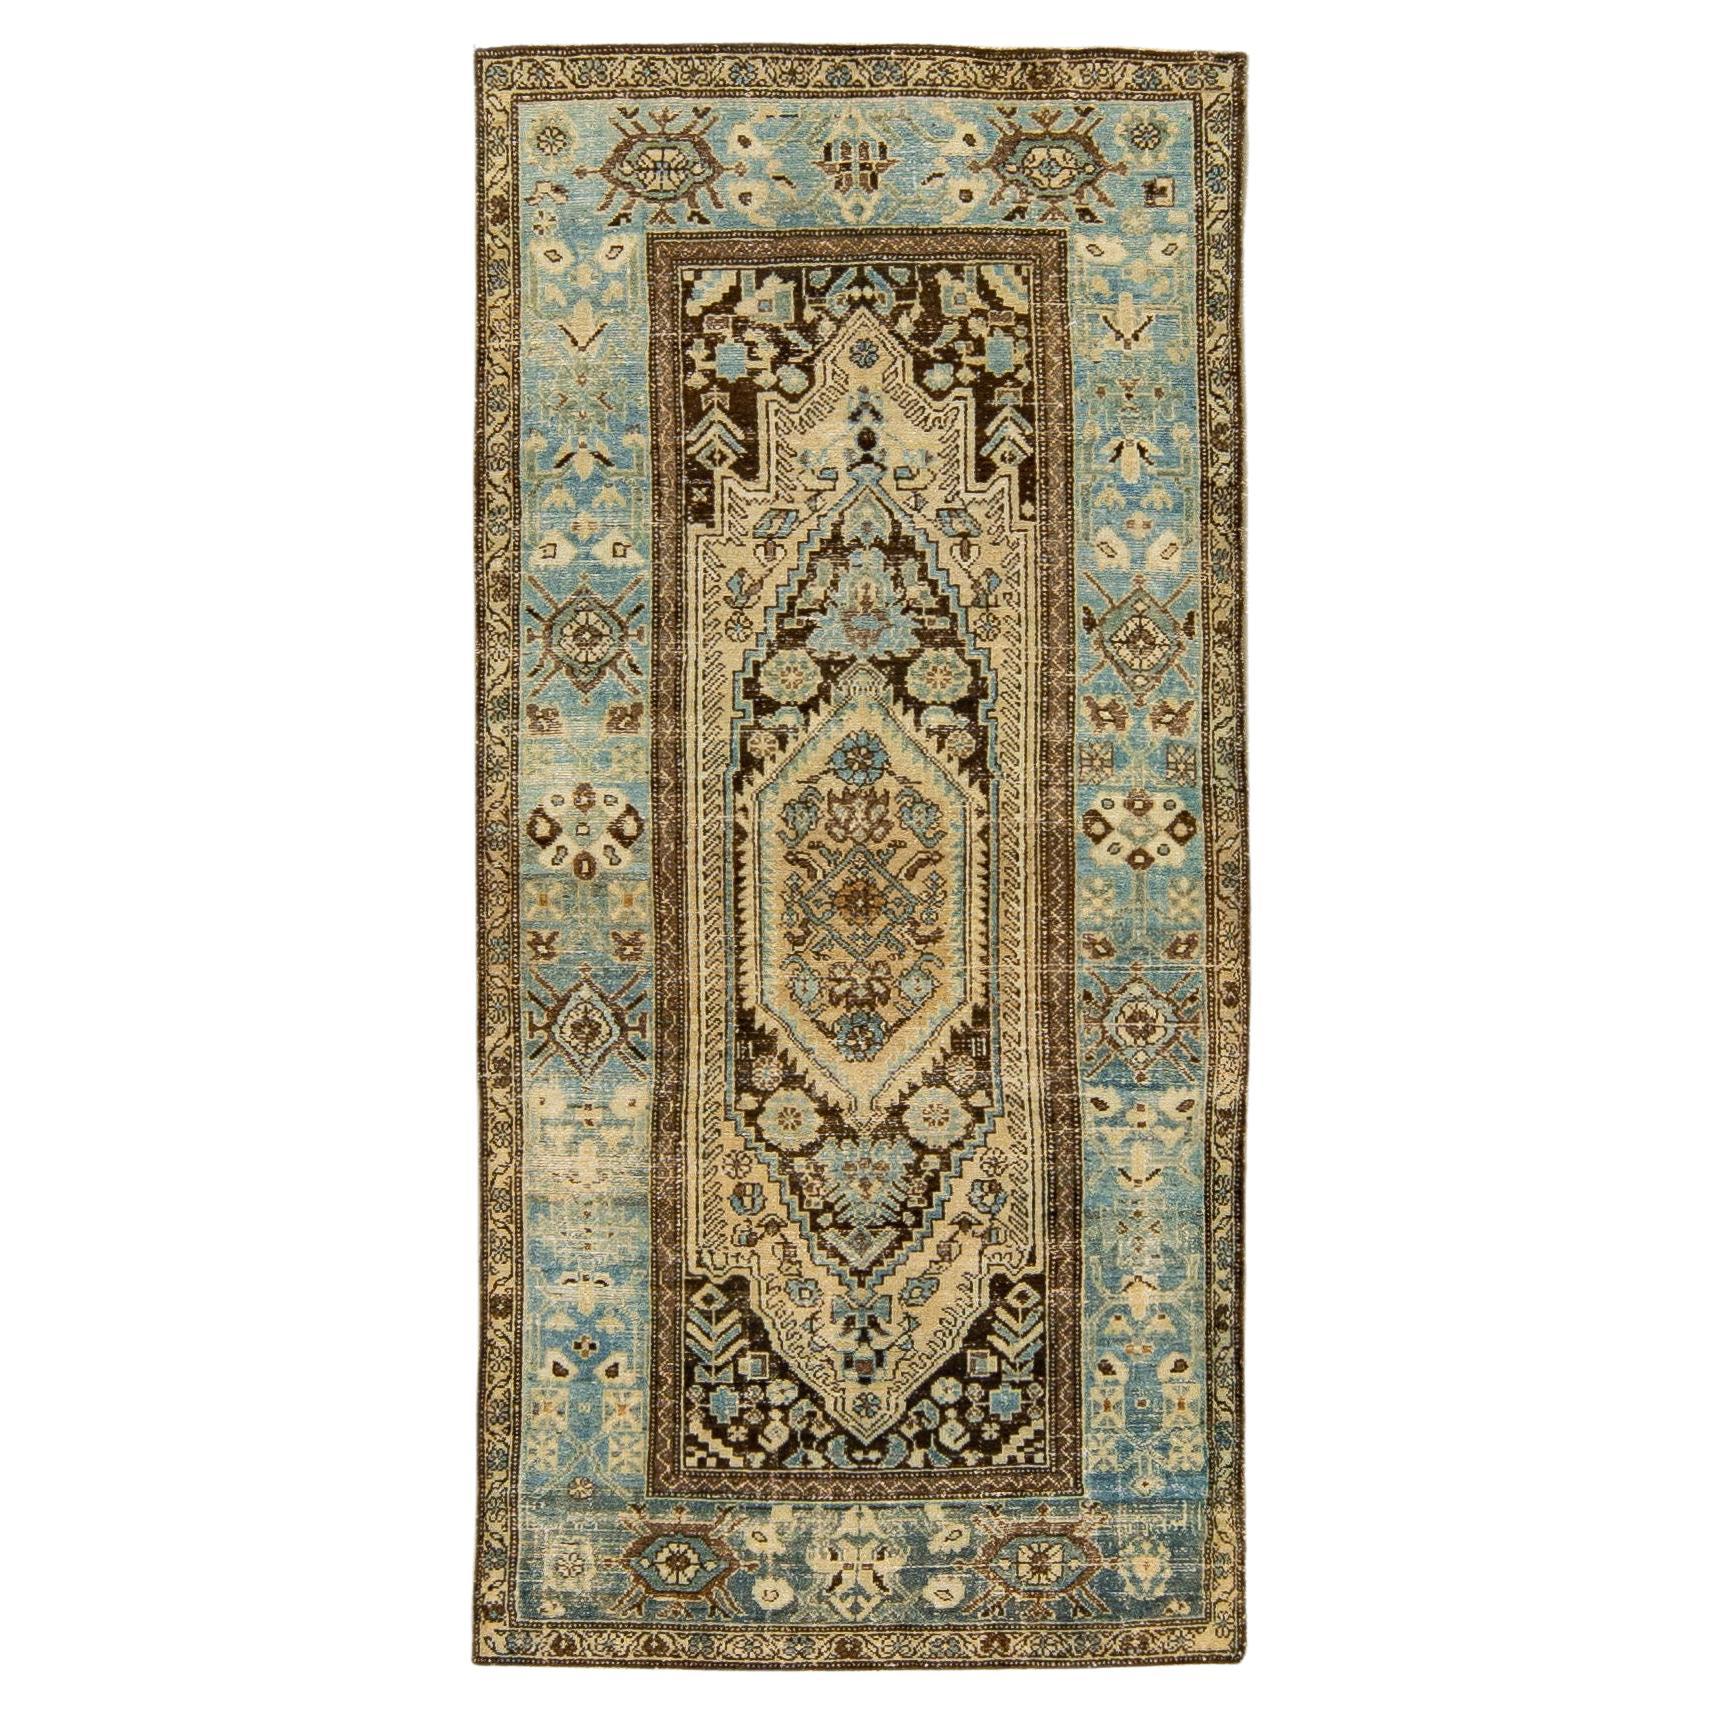 Antique Malayer Handmade Allover Designed Beige And Blue Wool Rug For Sale